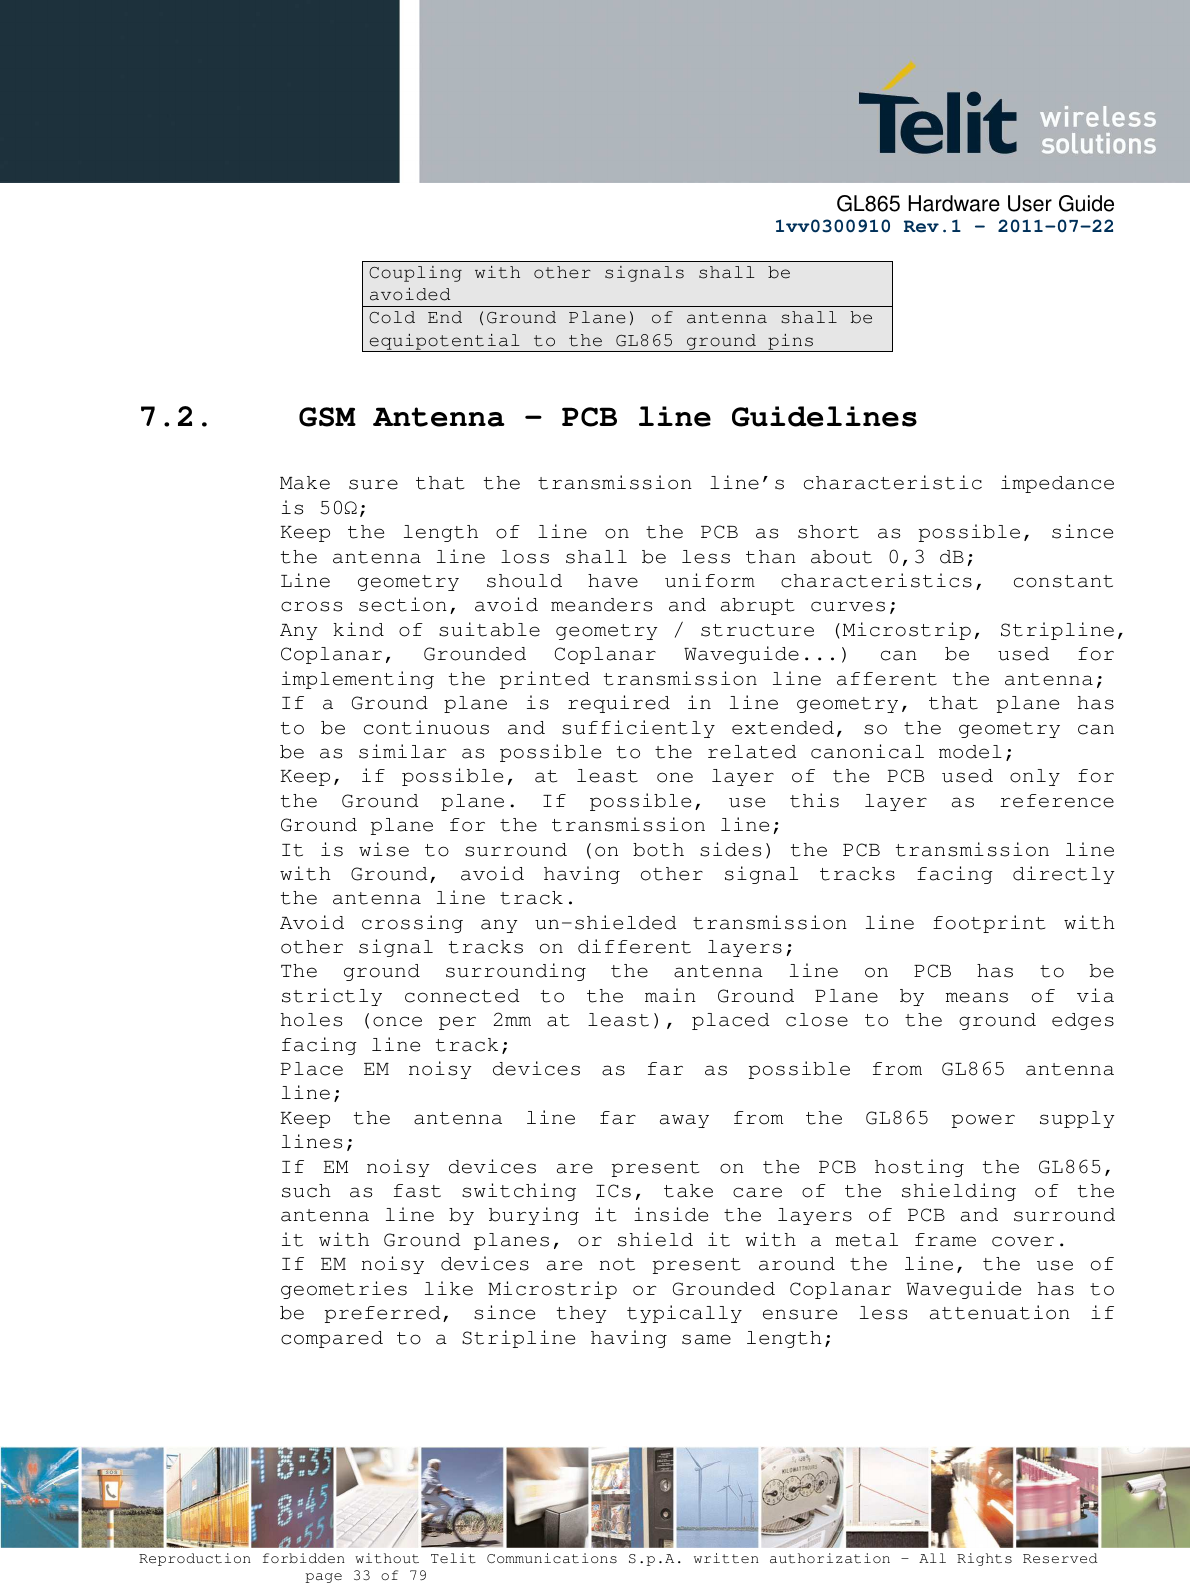      GL865 Hardware User Guide     1vv0300910 Rev.1 – 2011-07-22       Reproduction forbidden without Telit Communications S.p.A. written authorization - All Rights Reserved    page 33 of 79  Coupling with other signals shall be avoided Cold End (Ground Plane) of antenna shall be equipotential to the GL865 ground pins  7.2.  GSM Antenna - PCB line Guidelines  Make sure  that  the  transmission line’s characteristic impedance is 50Ω; Keep the  length of line  on the PCB  as  short as possible,  since the antenna line loss shall be less than about 0,3 dB; Line  geometry  should  have  uniform  characteristics,  constant cross section, avoid meanders and abrupt curves; Any kind of suitable geometry / structure (Microstrip, Stripline, Coplanar,  Grounded  Coplanar  Waveguide...)  can  be  used  for implementing the printed transmission line afferent the antenna; If a  Ground  plane  is  required  in  line  geometry, that  plane  has to be continuous and sufficiently extended, so the geometry can be as similar as possible to the related canonical model; Keep, if  possible, at least  one layer of  the PCB used  only for the  Ground  plane.  If  possible,  use  this  layer  as  reference Ground plane for the transmission line; It is wise to surround (on both sides) the PCB transmission line with  Ground,  avoid  having  other  signal  tracks  facing  directly the antenna line track.  Avoid crossing any un-shielded transmission  line  footprint  with other signal tracks on different layers; The  ground  surrounding  the  antenna  line  on  PCB  has  to  be strictly  connected  to  the  main  Ground  Plane  by  means  of  via holes (once per 2mm at least), placed close to the ground edges facing line track; Place  EM  noisy  devices  as  far  as  possible  from  GL865  antenna line; Keep  the  antenna  line  far  away  from  the  GL865  power  supply lines; If  EM  noisy  devices  are  present  on  the  PCB  hosting  the  GL865, such  as  fast  switching  ICs,  take  care  of  the  shielding  of  the antenna line by burying it inside the layers of PCB and surround it with Ground planes, or shield it with a metal frame cover. If EM noisy devices are not present around the line, the use of geometries like Microstrip or Grounded Coplanar Waveguide has to be  preferred,  since  they  typically  ensure  less  attenuation  if compared to a Stripline having same length;     